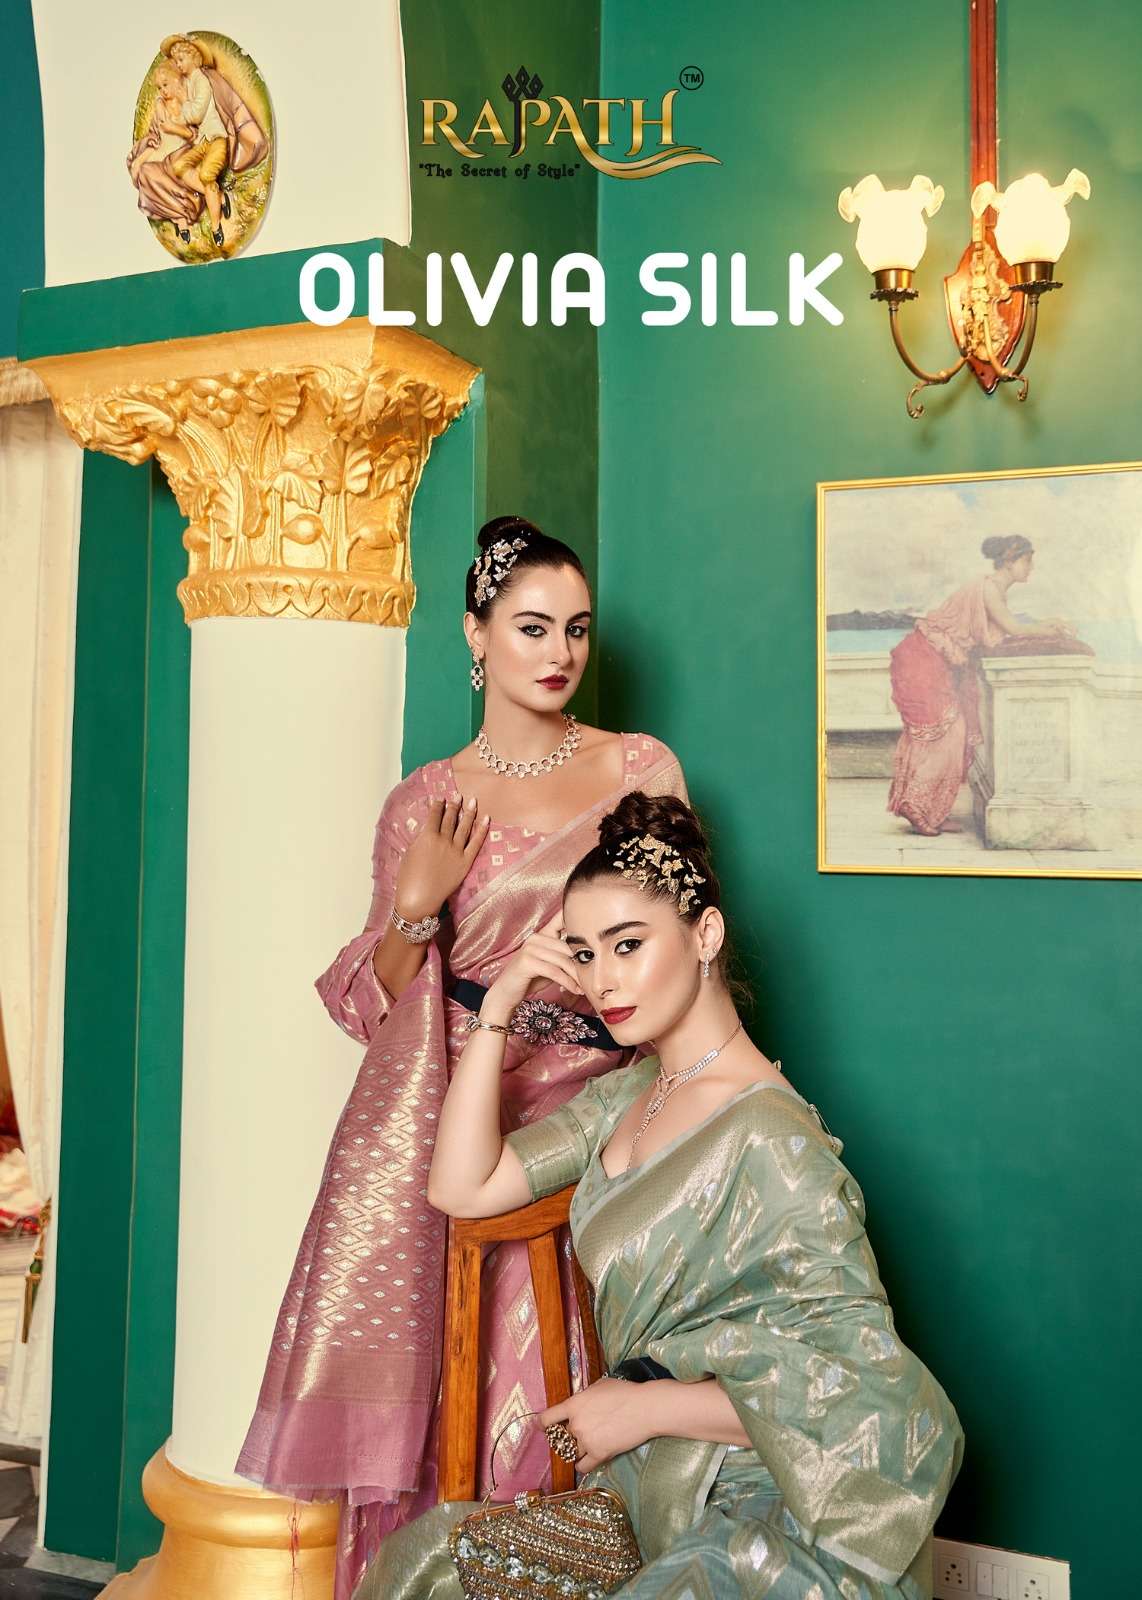 Rajpath OLIVIA SILK Cotton with fancy look saree collection ...